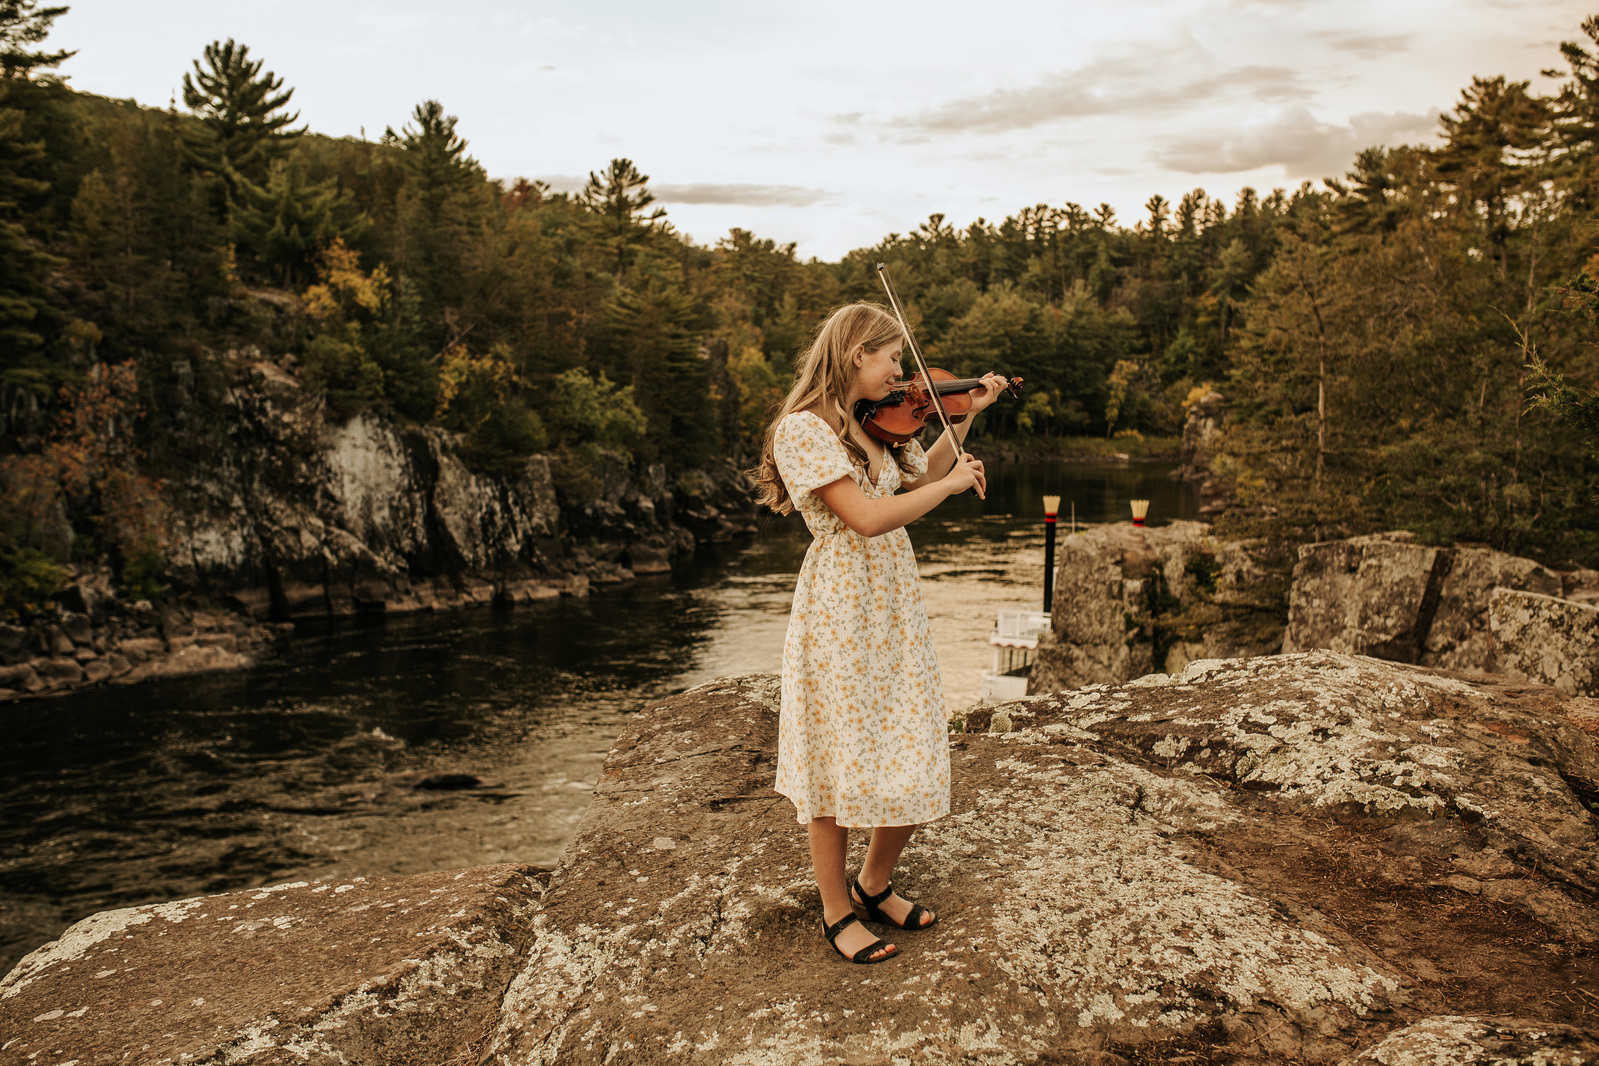 Senior session at Interstate Park in Taylors Falls Minnesota with a violin along the st croix river. Senior photos taken at The Doll House Studio in MN.